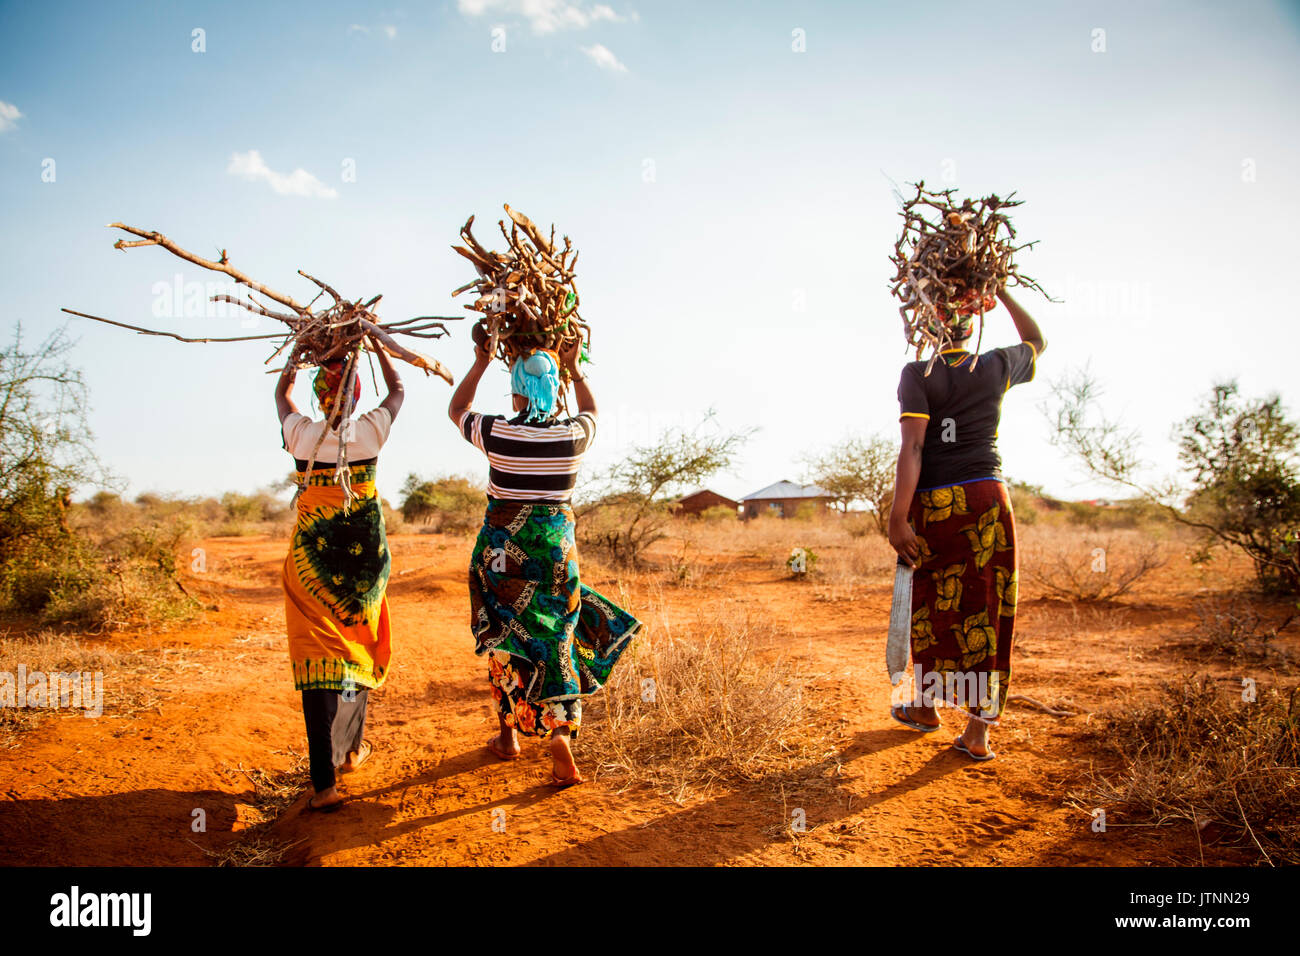 Zainabu Ramadhani, 19, (yellow and red patterned skirt) her mother Fatma Mziray, age 38, (blue head dress) and Fatmaâs sister-in-law Zaitun Hamad, 18, (orange wrap and white top) walk home after gathering firewood near Fatmaâs home in Mforo. Mforo is near Moshi, Tanzania. Fatma Mziray is a Solar Sister entrepreneur who sells both clean cookstoves and solar lanterns. Fatma heard about the cookstoves from a Solar Sister development associate and decided to try one out. Stock Photo